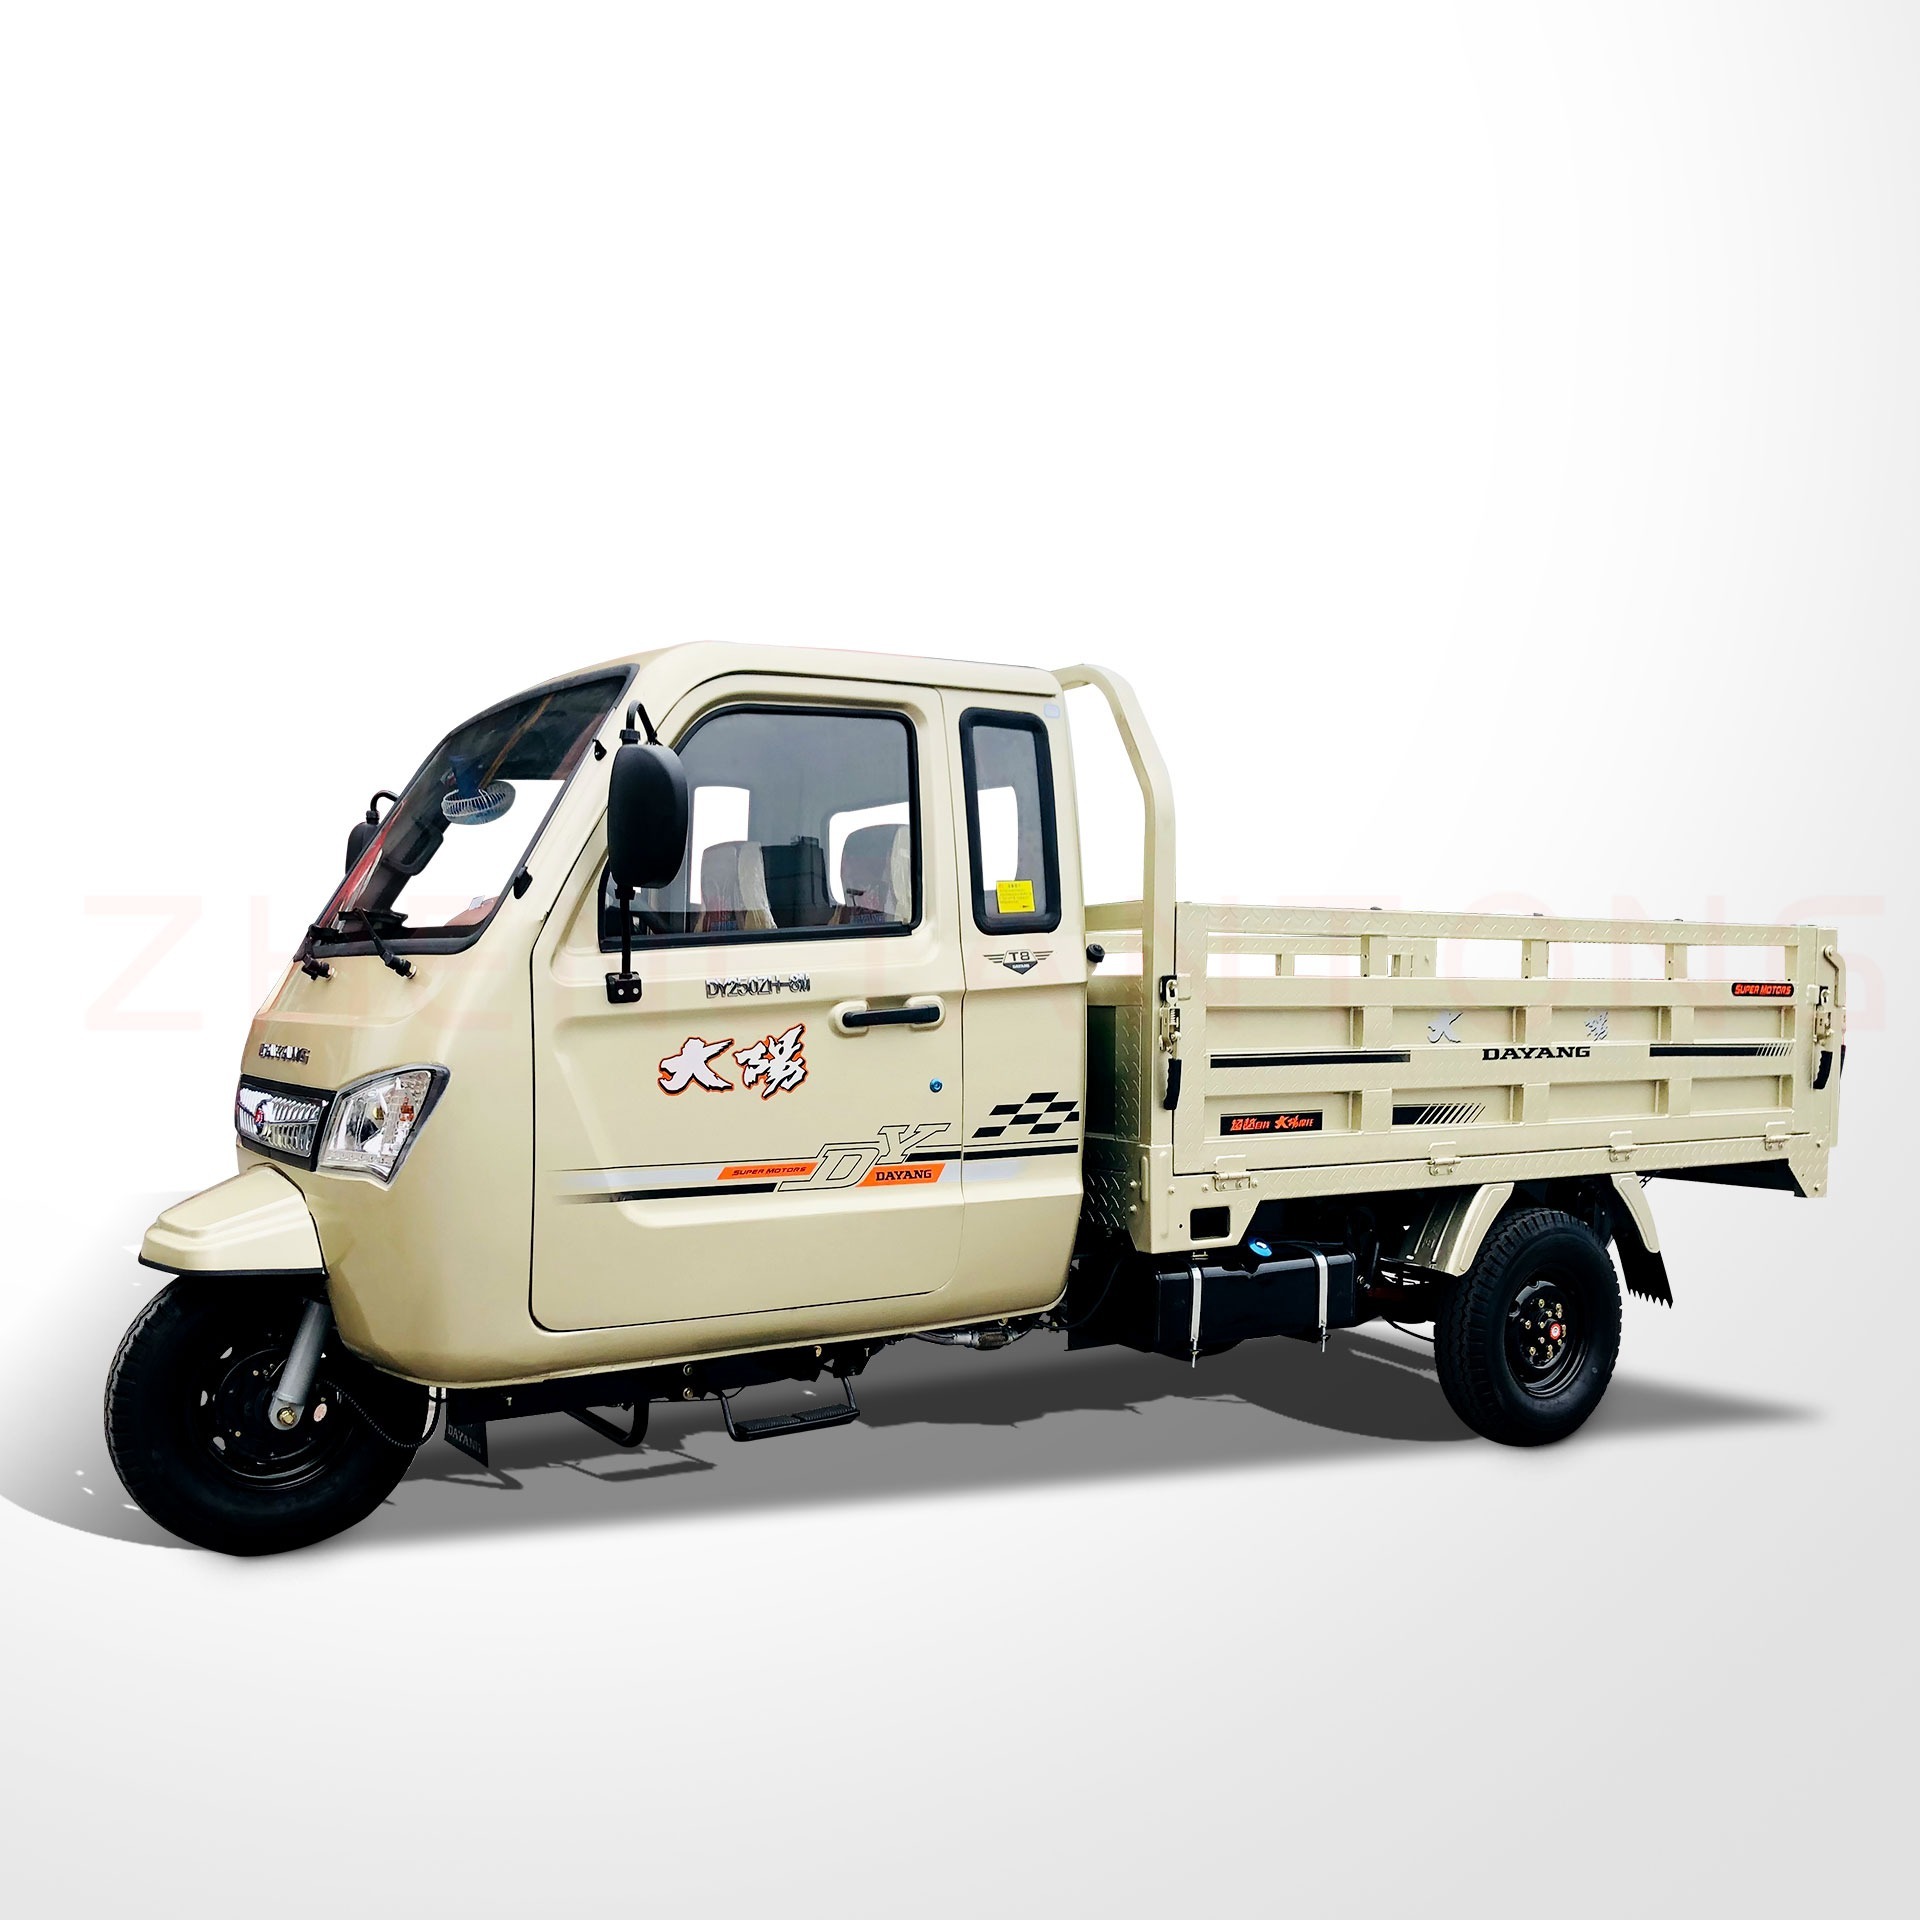 DAYANG Heavy duty three wheel cargo tricycle for sale in cheap price 3 wheel motorized motorcycle car with drive cabin  scooter